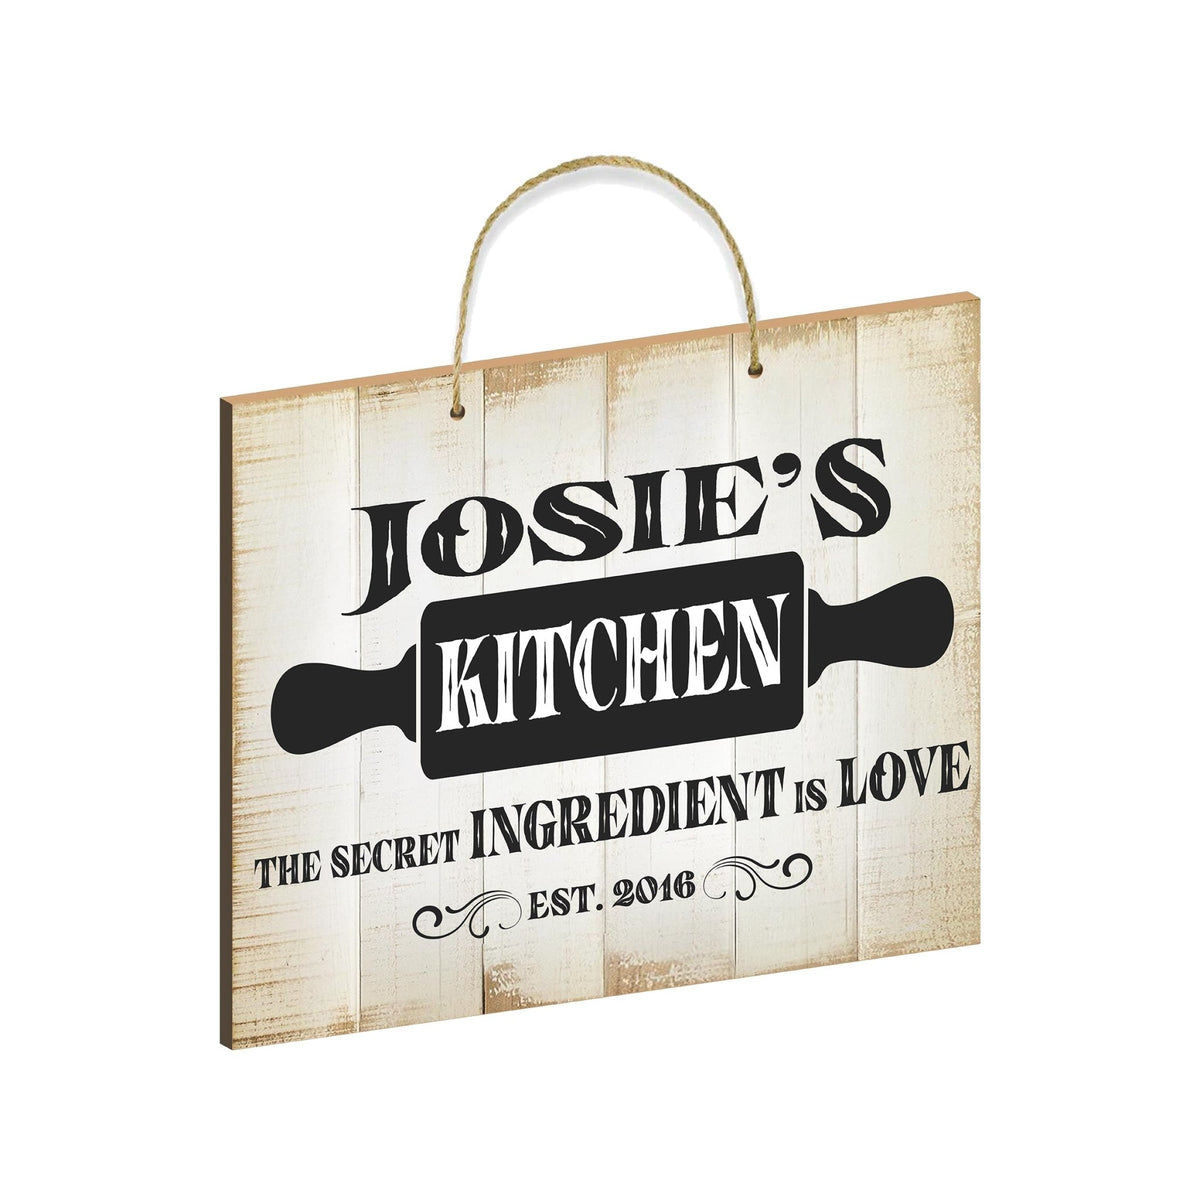 Rustic-Inspired Wooden Wall Hanging Rope Sign For Kitchen &amp; Home Décor - Ingredients